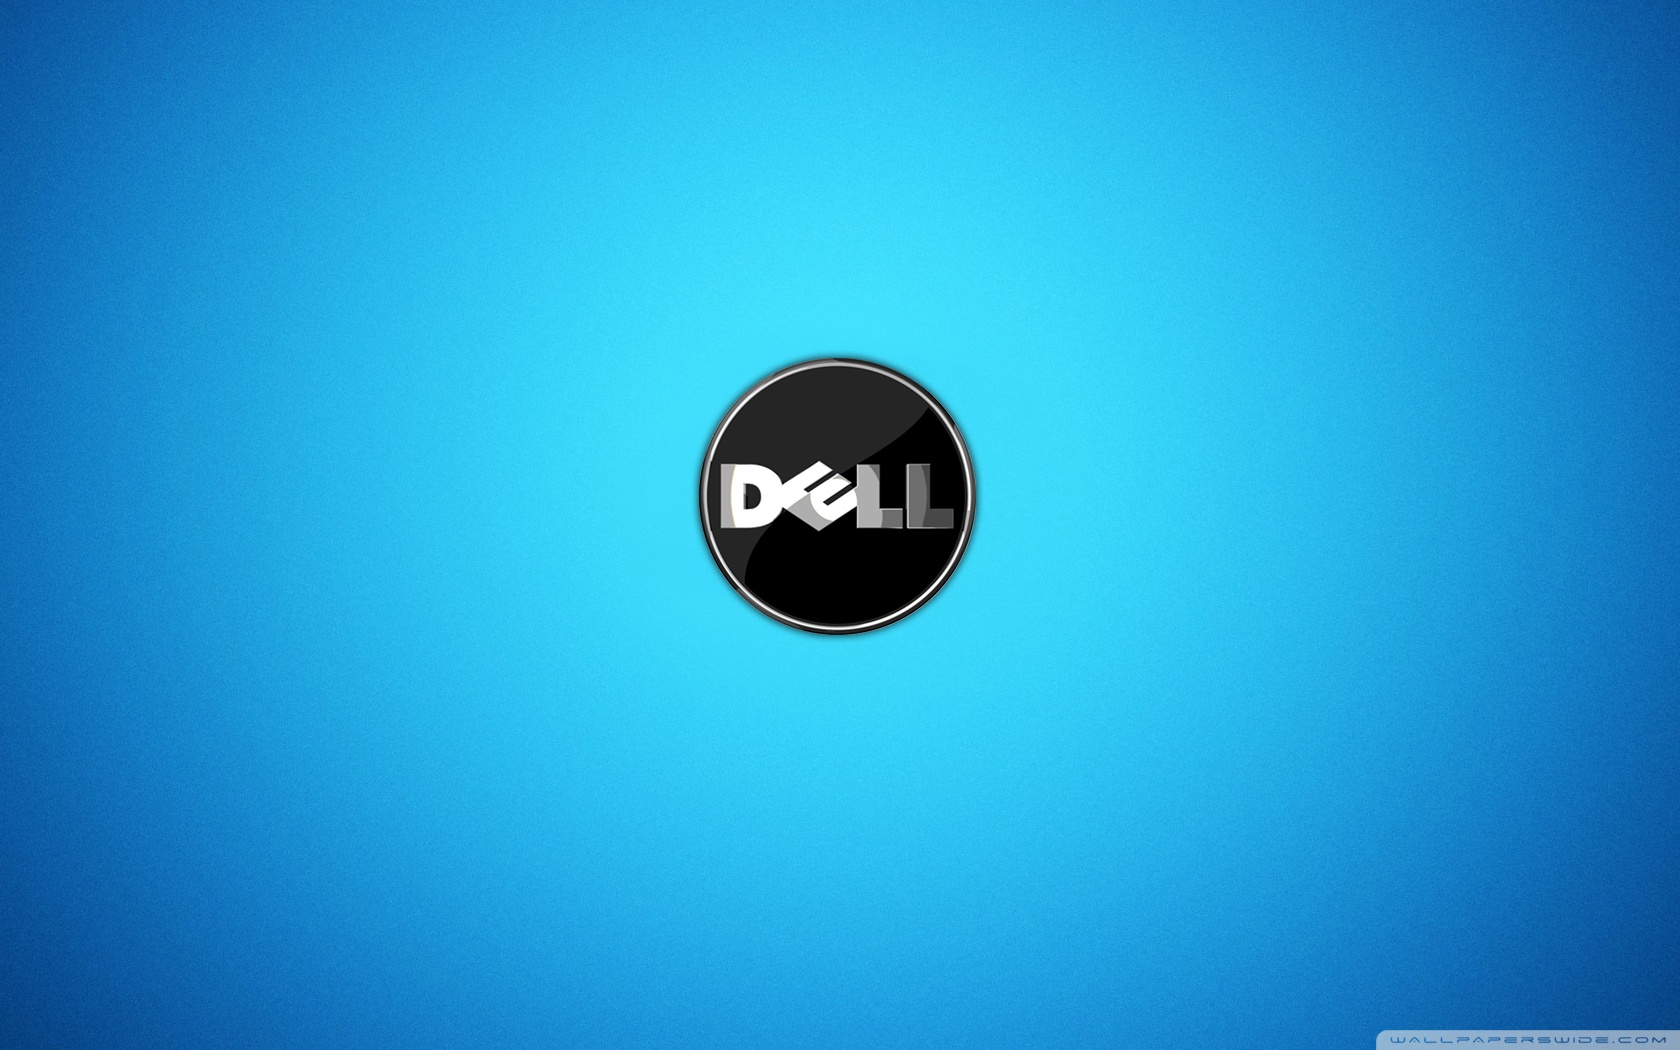 Dell Widescreen Wallpaper Wallpapers Hd Quality